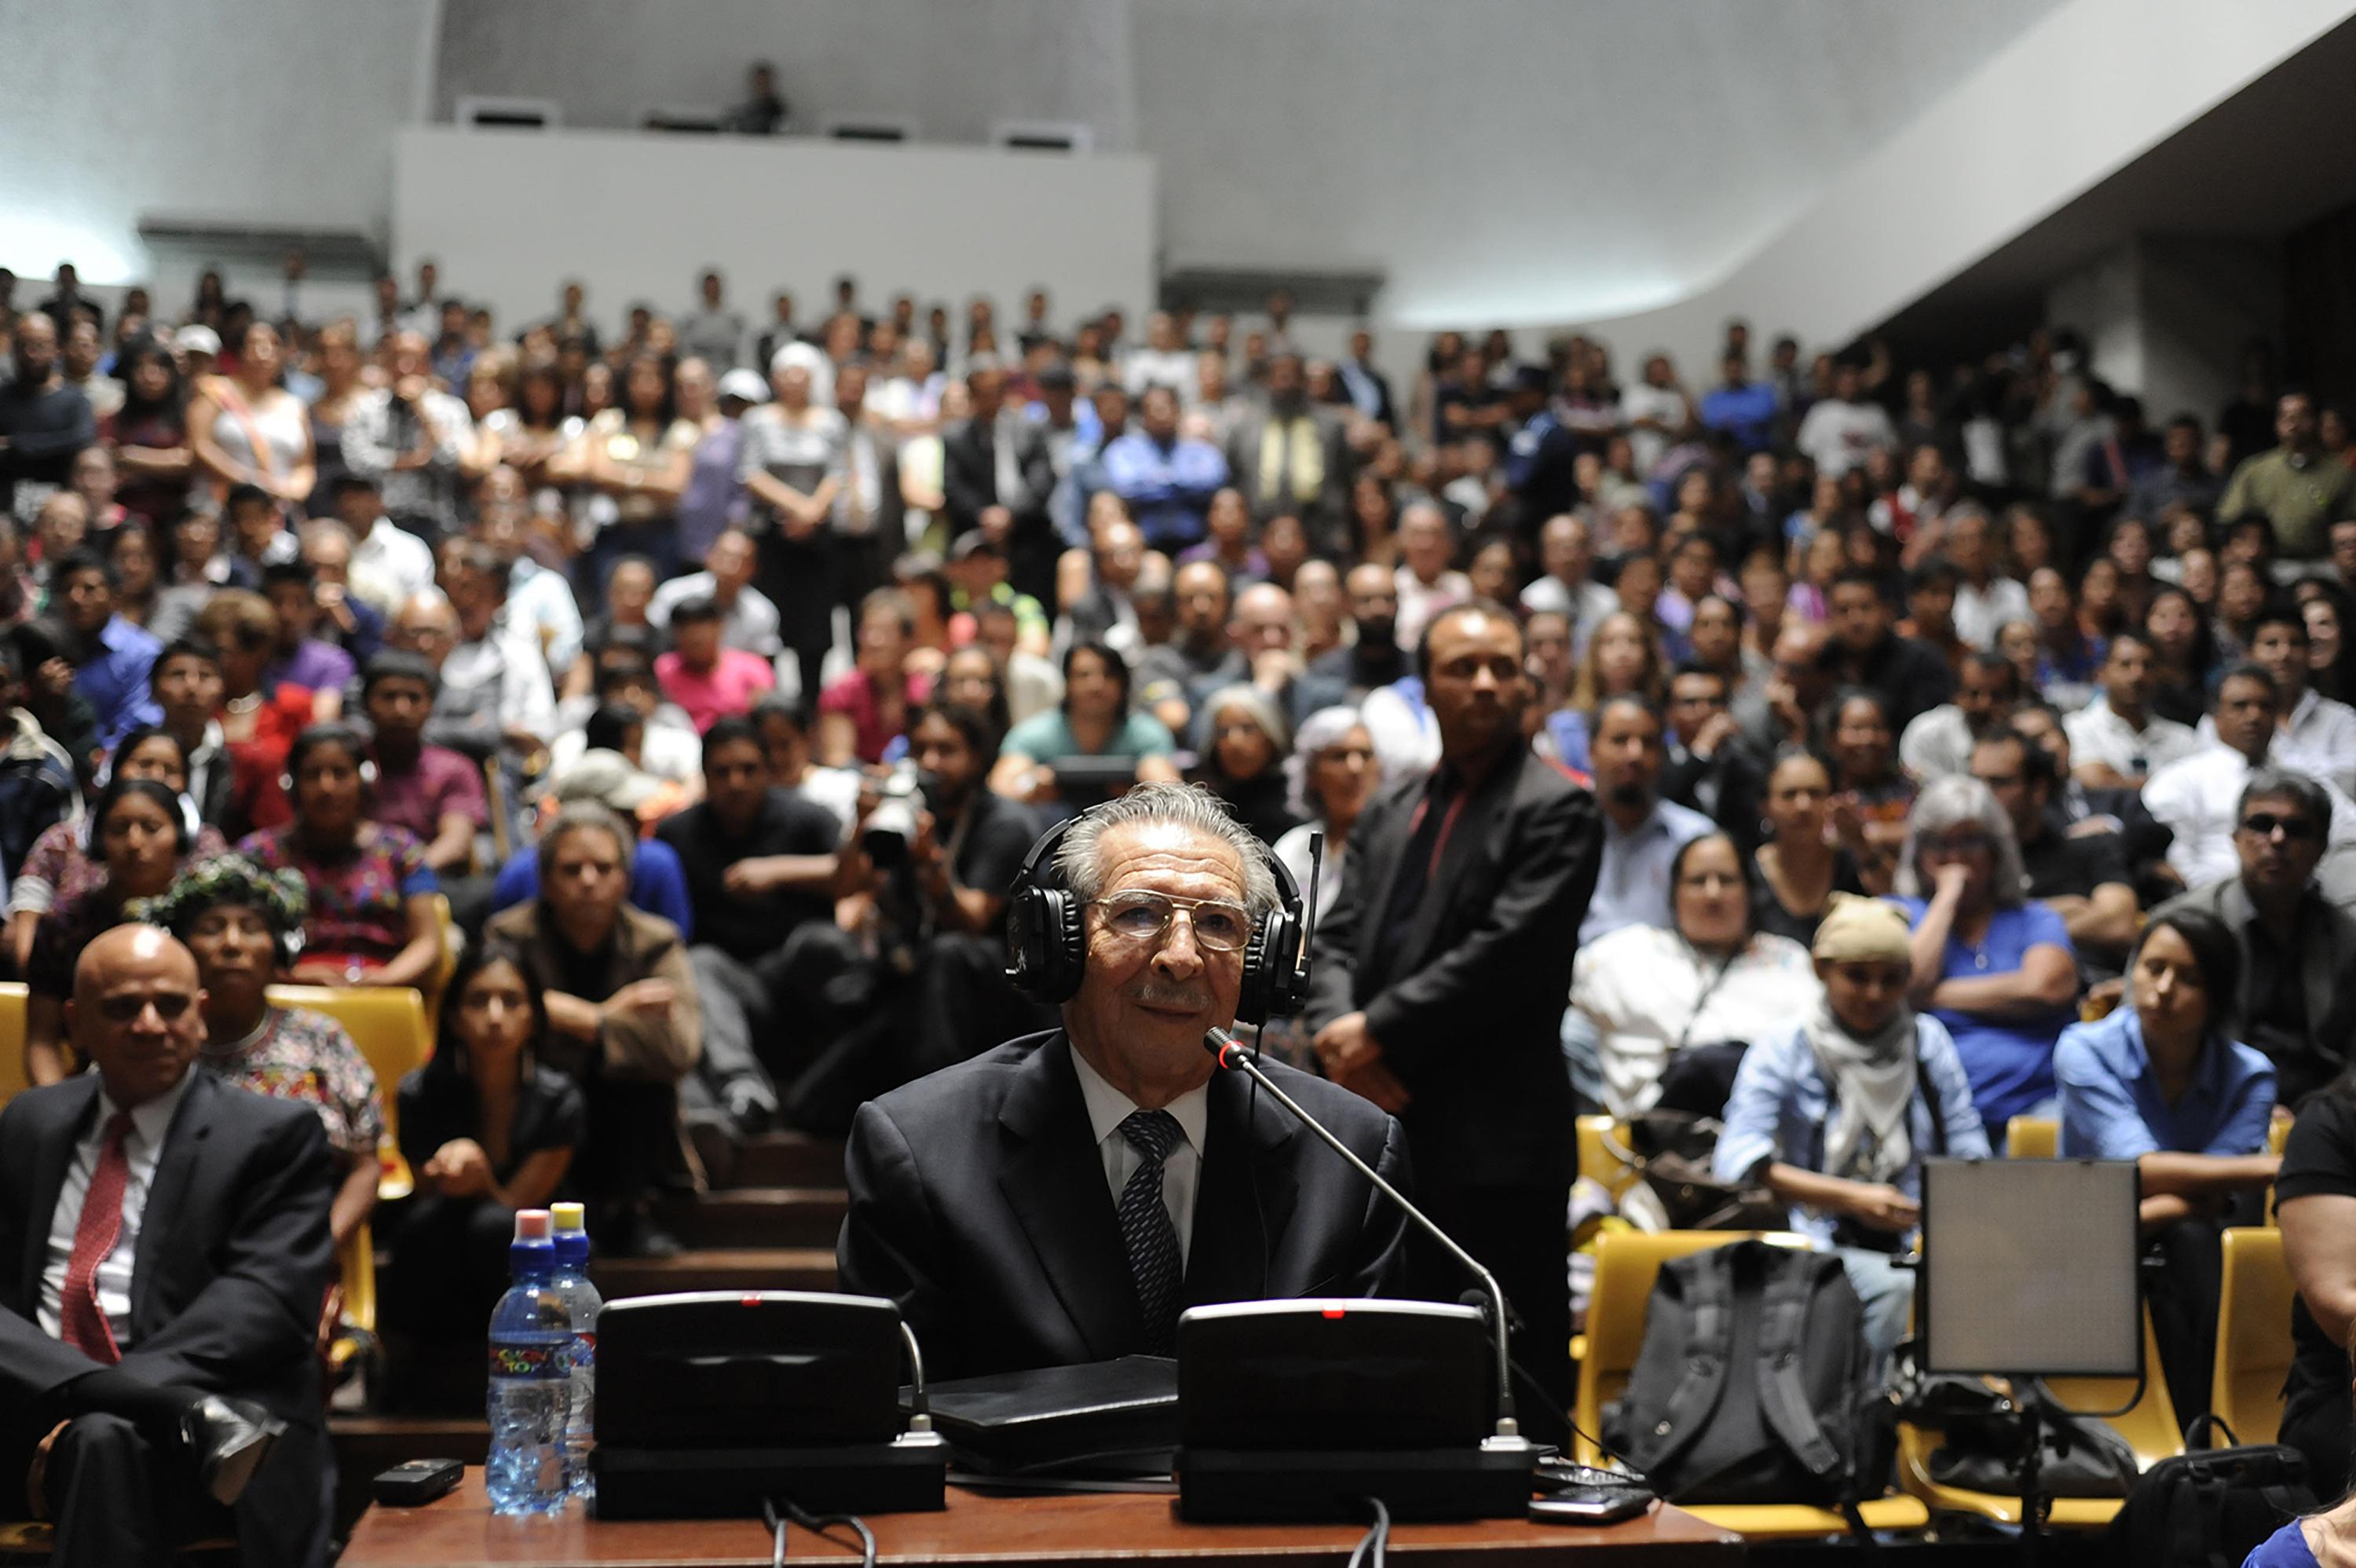 Former Guatemalan dictator (1982-1983), General José Efraín Ríos Montt, testifies on May 9, 2013 while on trial for the crime of genocide. Ríos Montt was found guilty, but the Supreme Court ordered a retrial citing procedural errors. He died before a second trial could take place. Photo: Johan Ordóñez/AFP